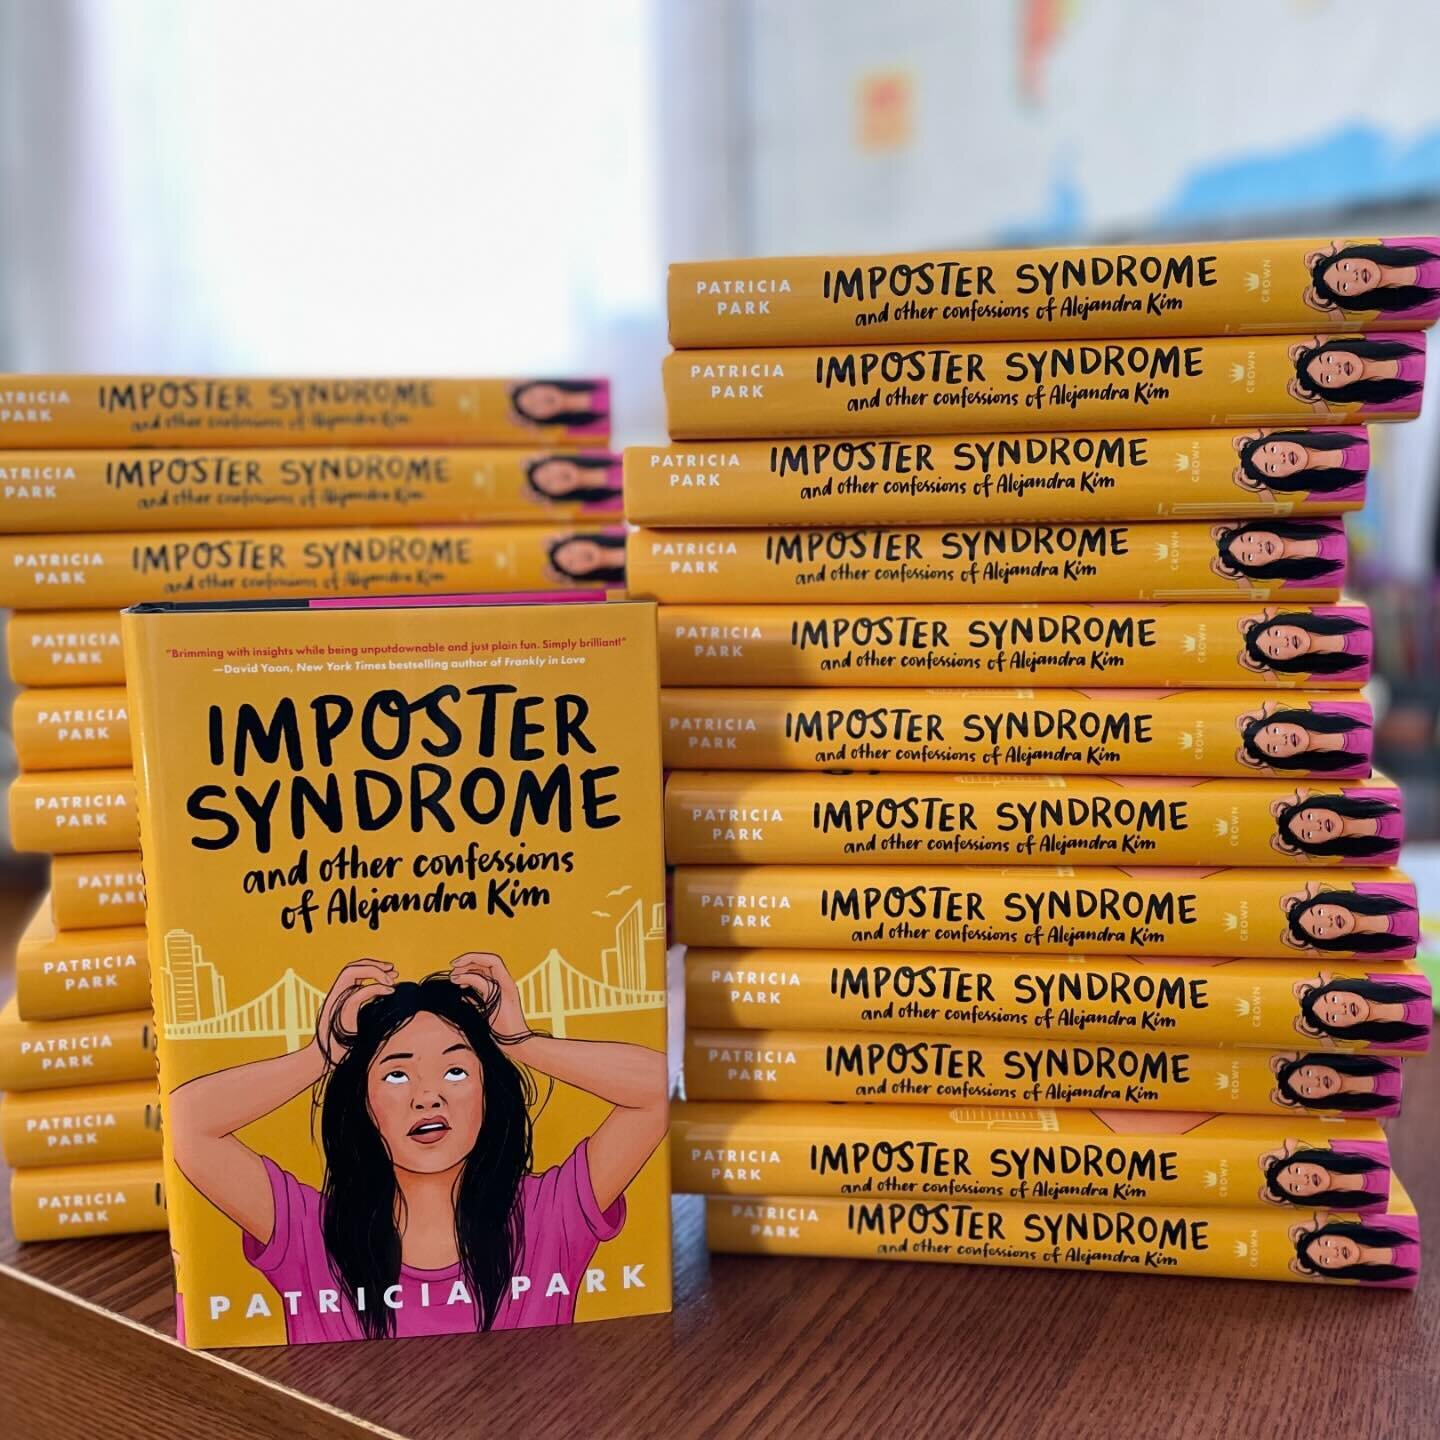 @patriciapark718 author of &ldquo;Imposter Syndrome&rdquo; visited our middle school class today!  I am so thankful that our younger generation gets to read books about our experiences written by those who look like us! Representation matters!